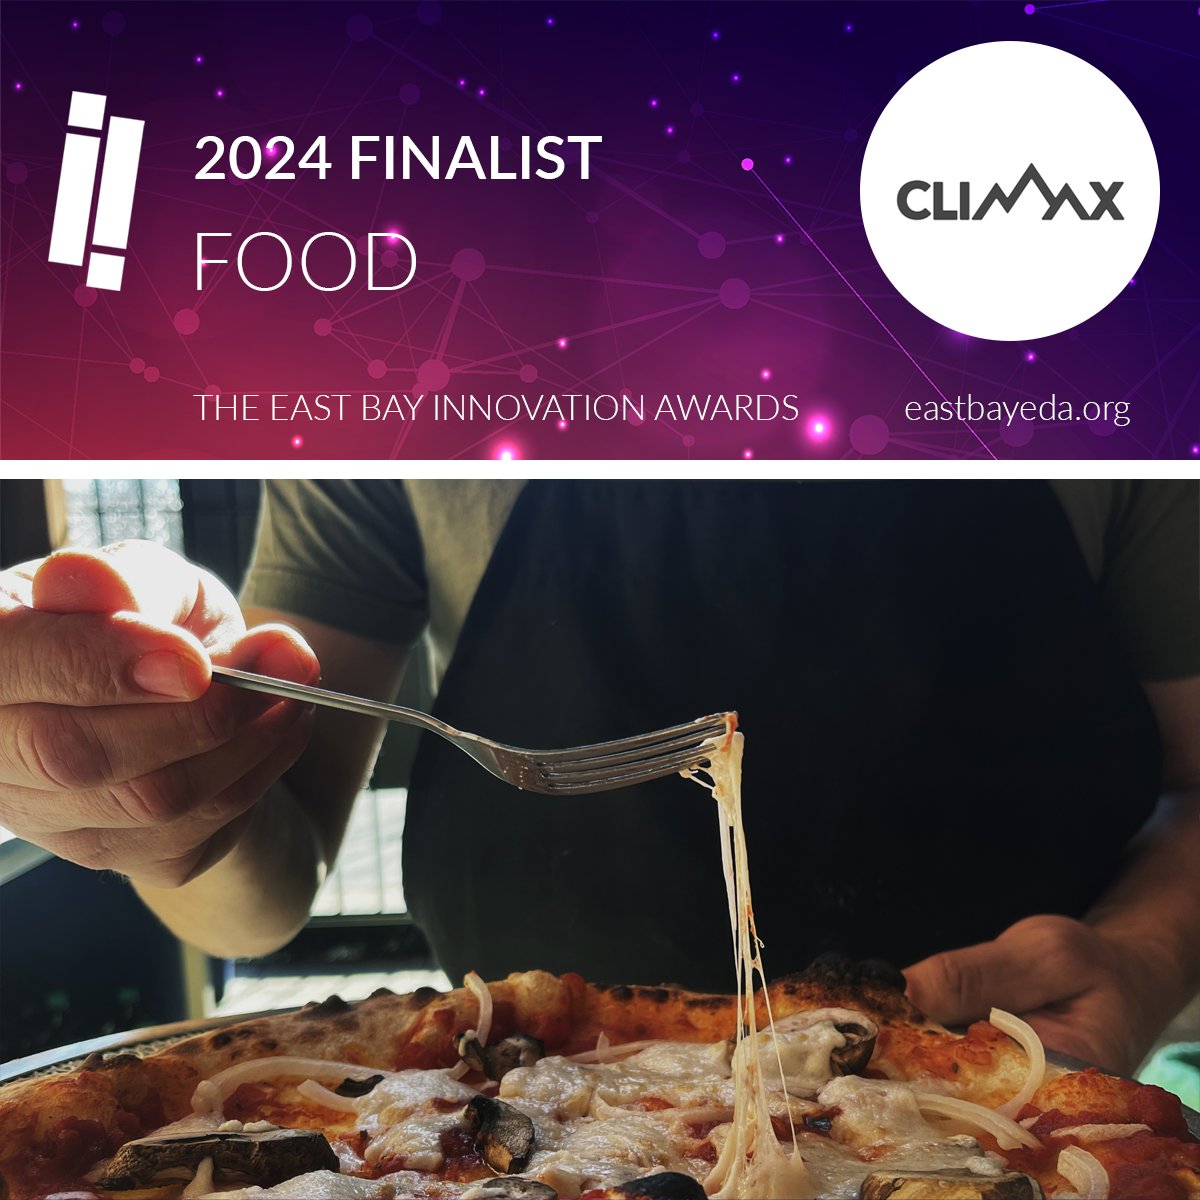 Climax Foods is a #plantbased company crafting superior cheeses from plants, in terms of taste, flavor, and #nutrition. @ClimaxFoods in #Berkeley is a 2024 #Food Finalist for the #EastBayiAwards on March 28th! Visit climax.bio and bit.ly/iawards24! #cheese